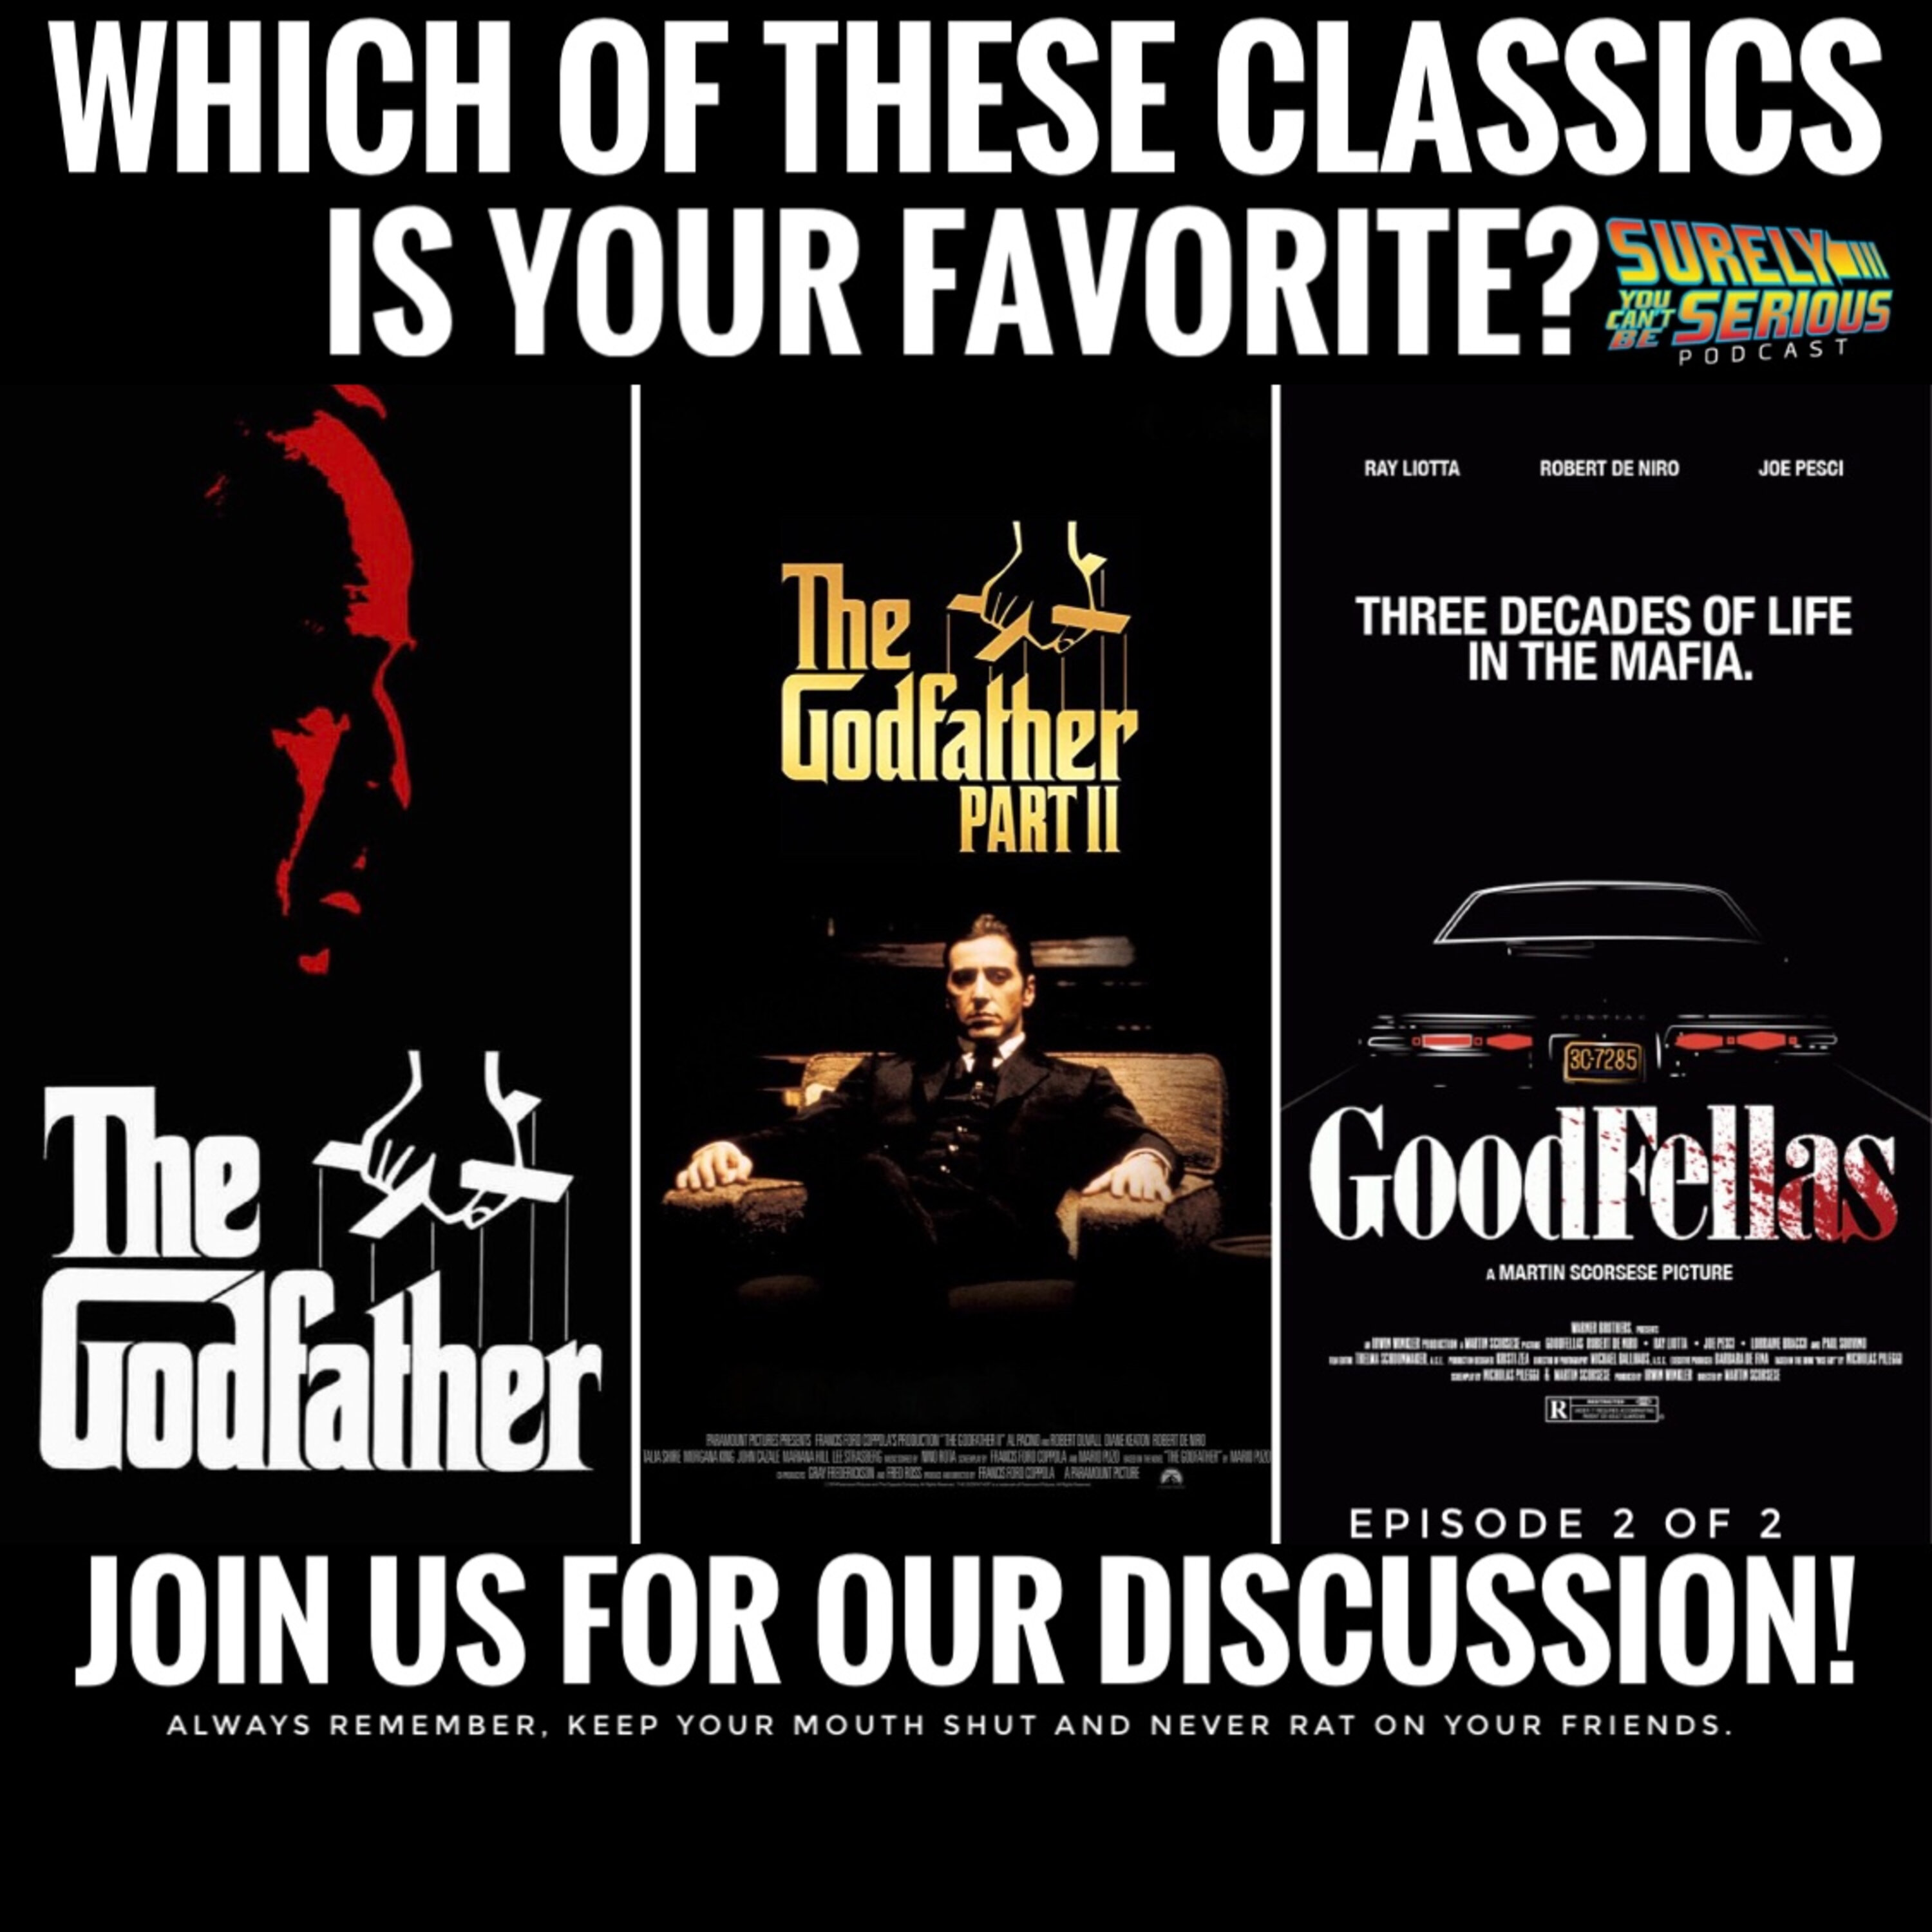 The Godfather (1972) vs. The Godfather Part 2 (1974) vs. Goodfellas (1990): Episode 2 Image